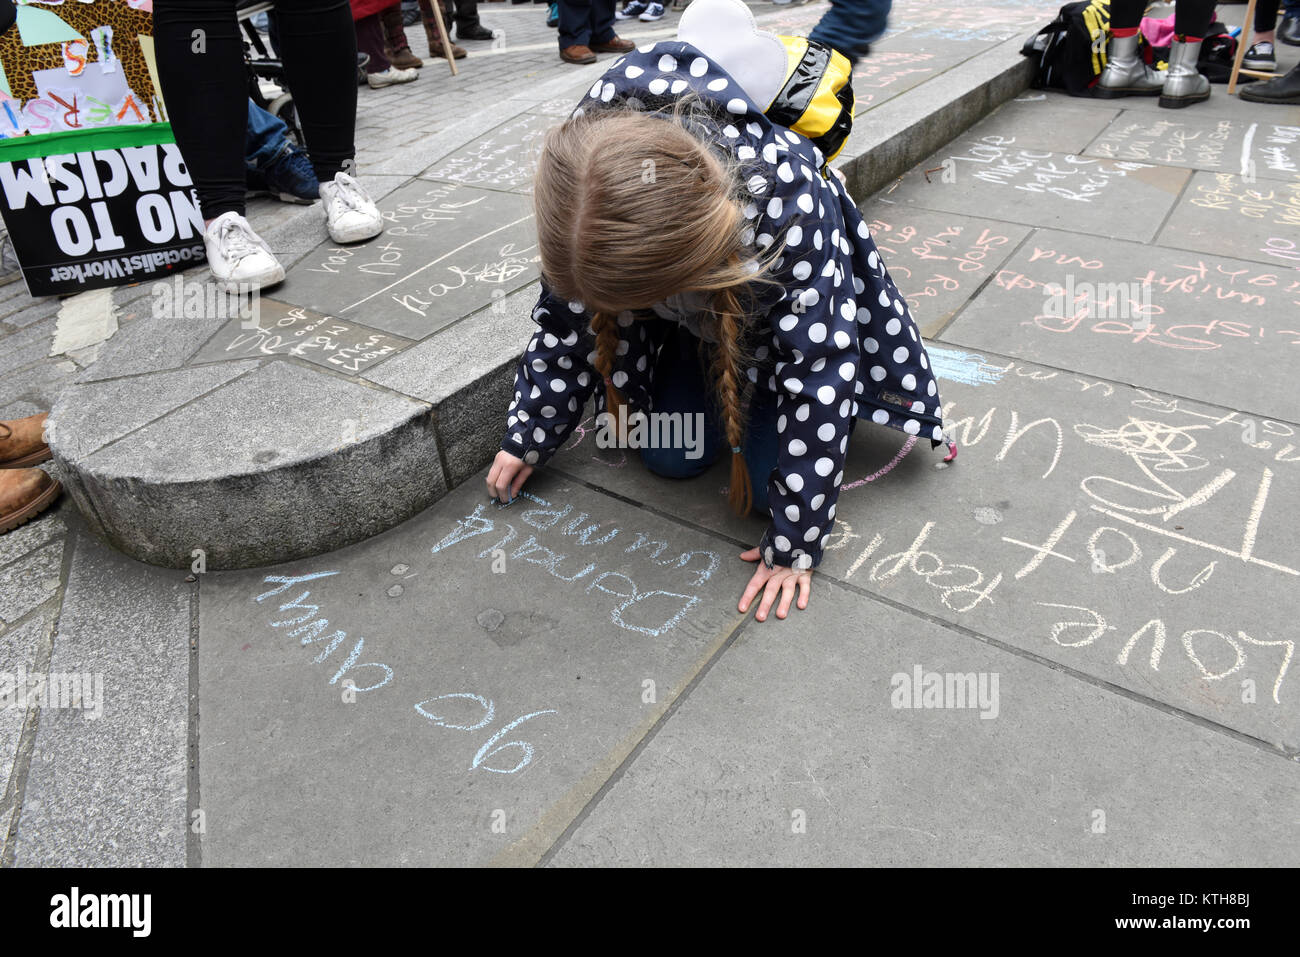 A child protester is writing anti-Trump anti-racism message reading: 'go away Donald Trump' on the pavement during the UN Anti-Racism Day in London, UK Stock Photo